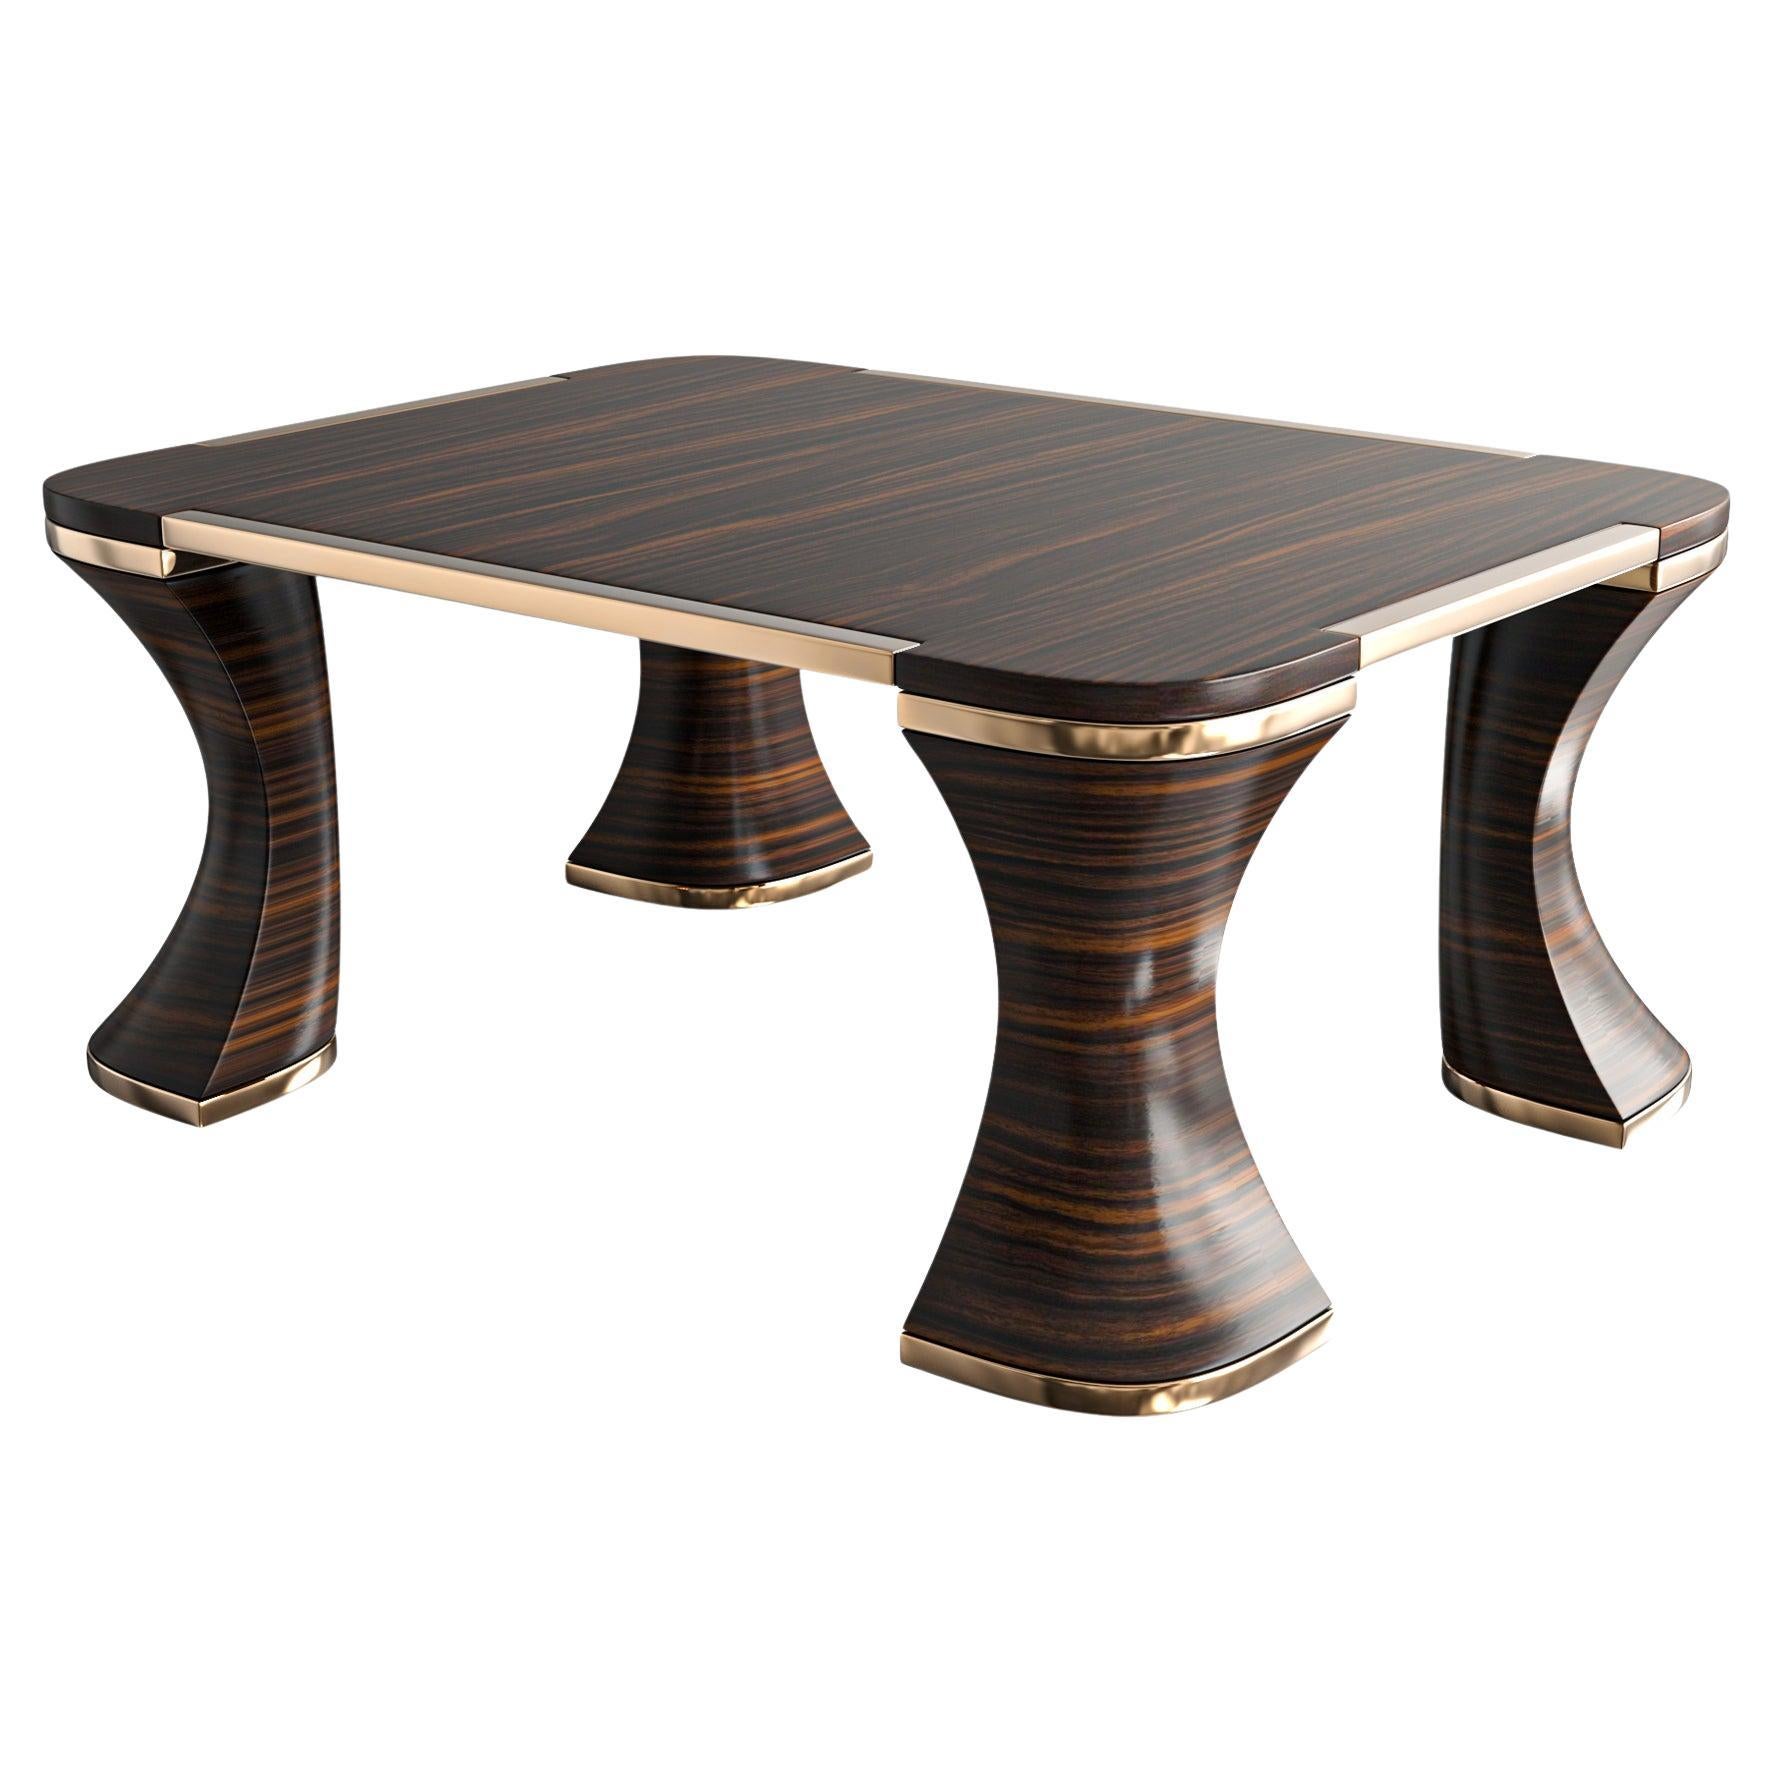 "Rispetti" Coffee Table With Bronze Details, Handcrafted, Istanbul For Sale